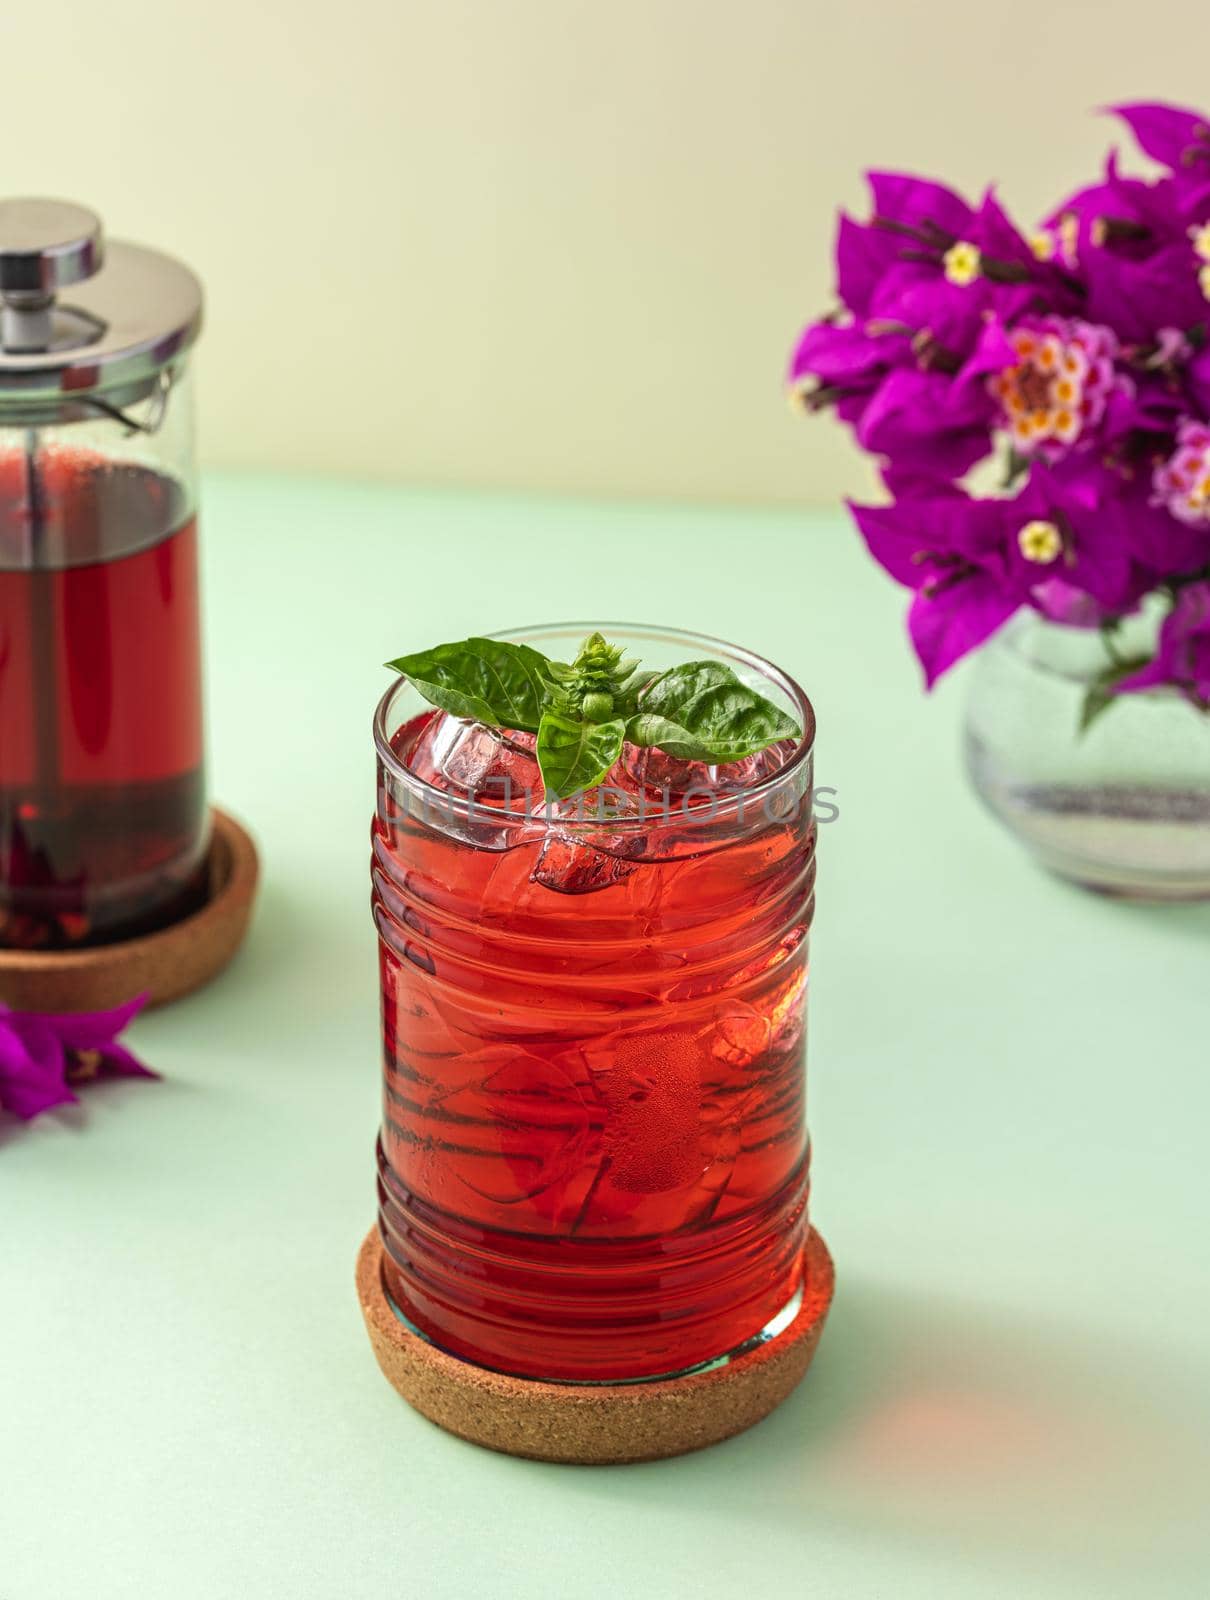 Freshly brewed iced red fruit tea on green table by Sonat